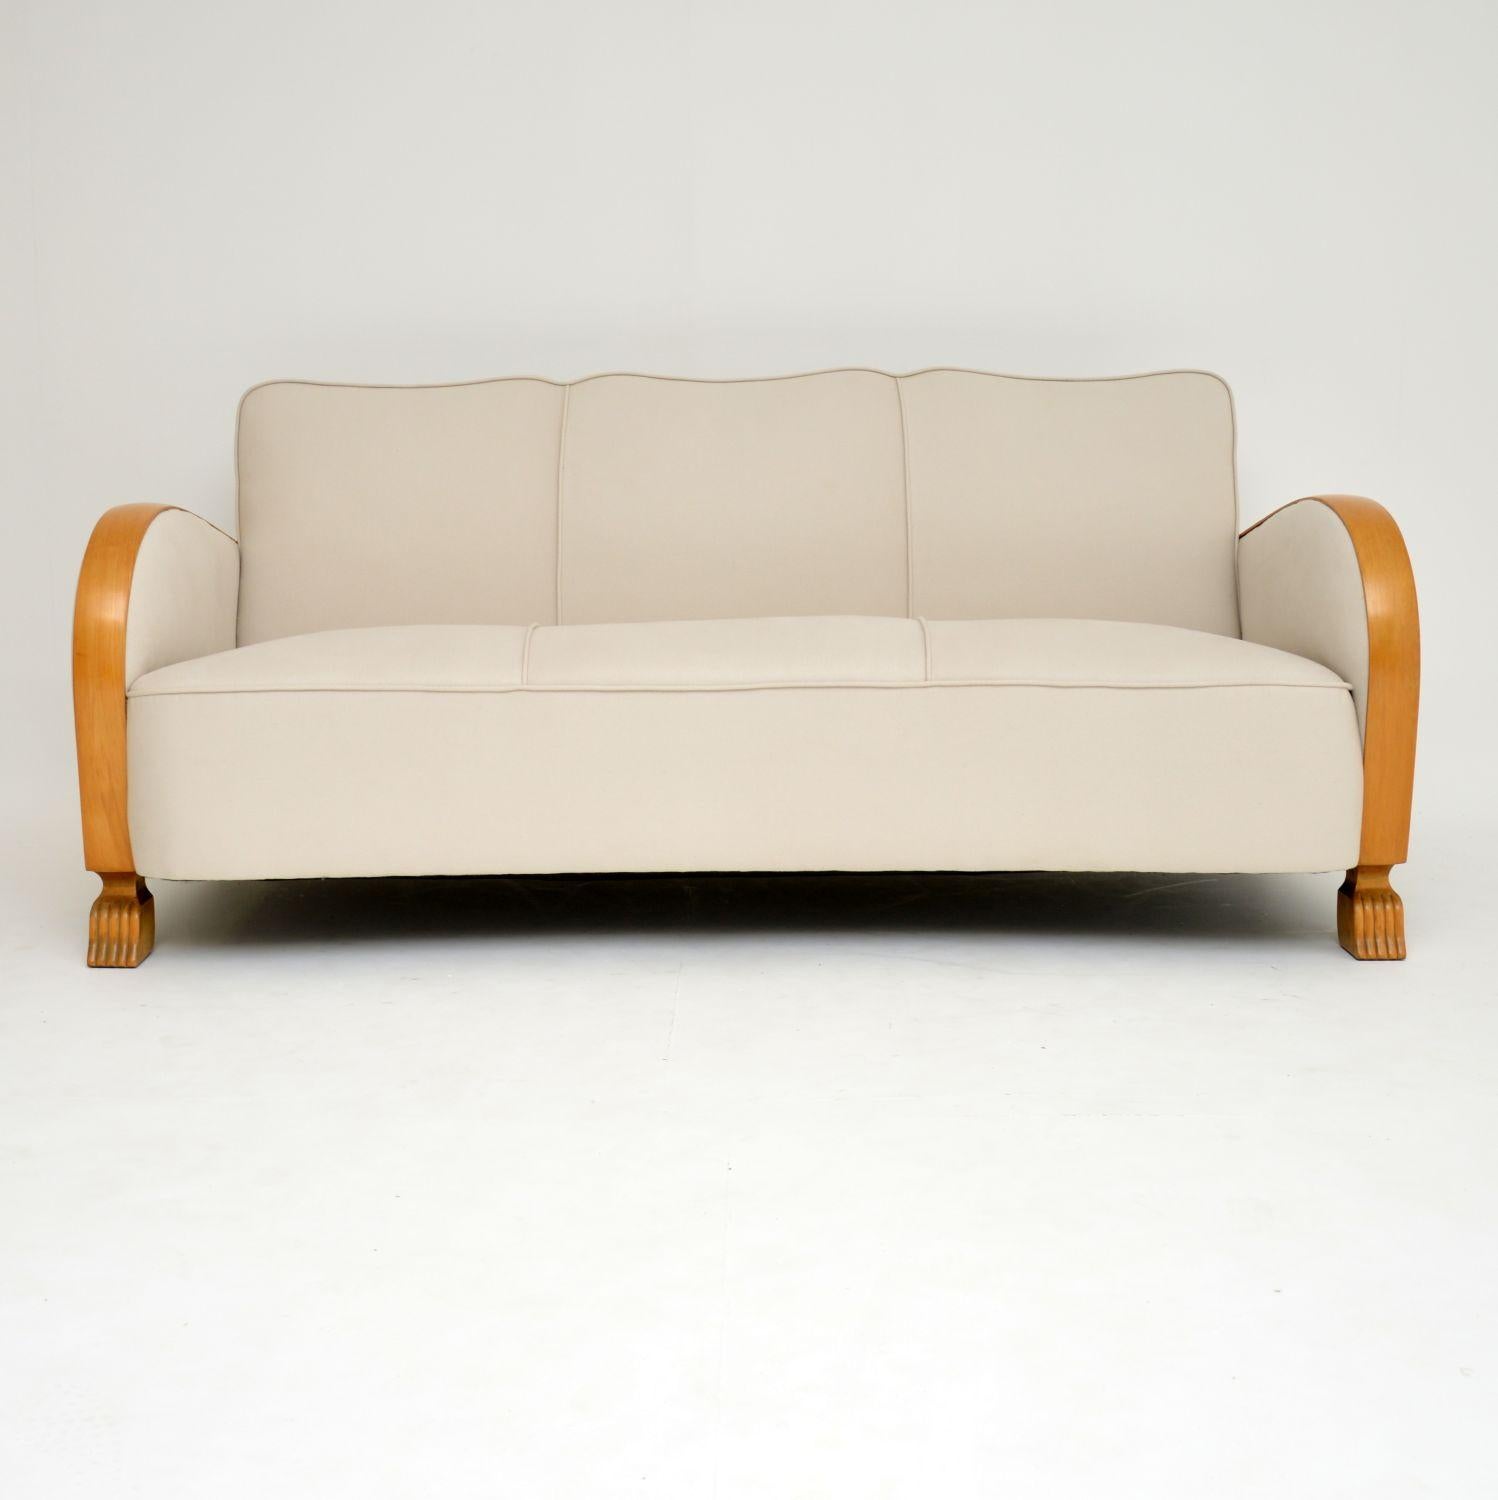 Very stylish original Swedish Art Deco three-seat sofa with satin birch arms and feet, dating to circa 1930s.

It’s in excellent condition, having just been polished and re-upholstered in our regular cream cotton linen fabric.

This sofa is also